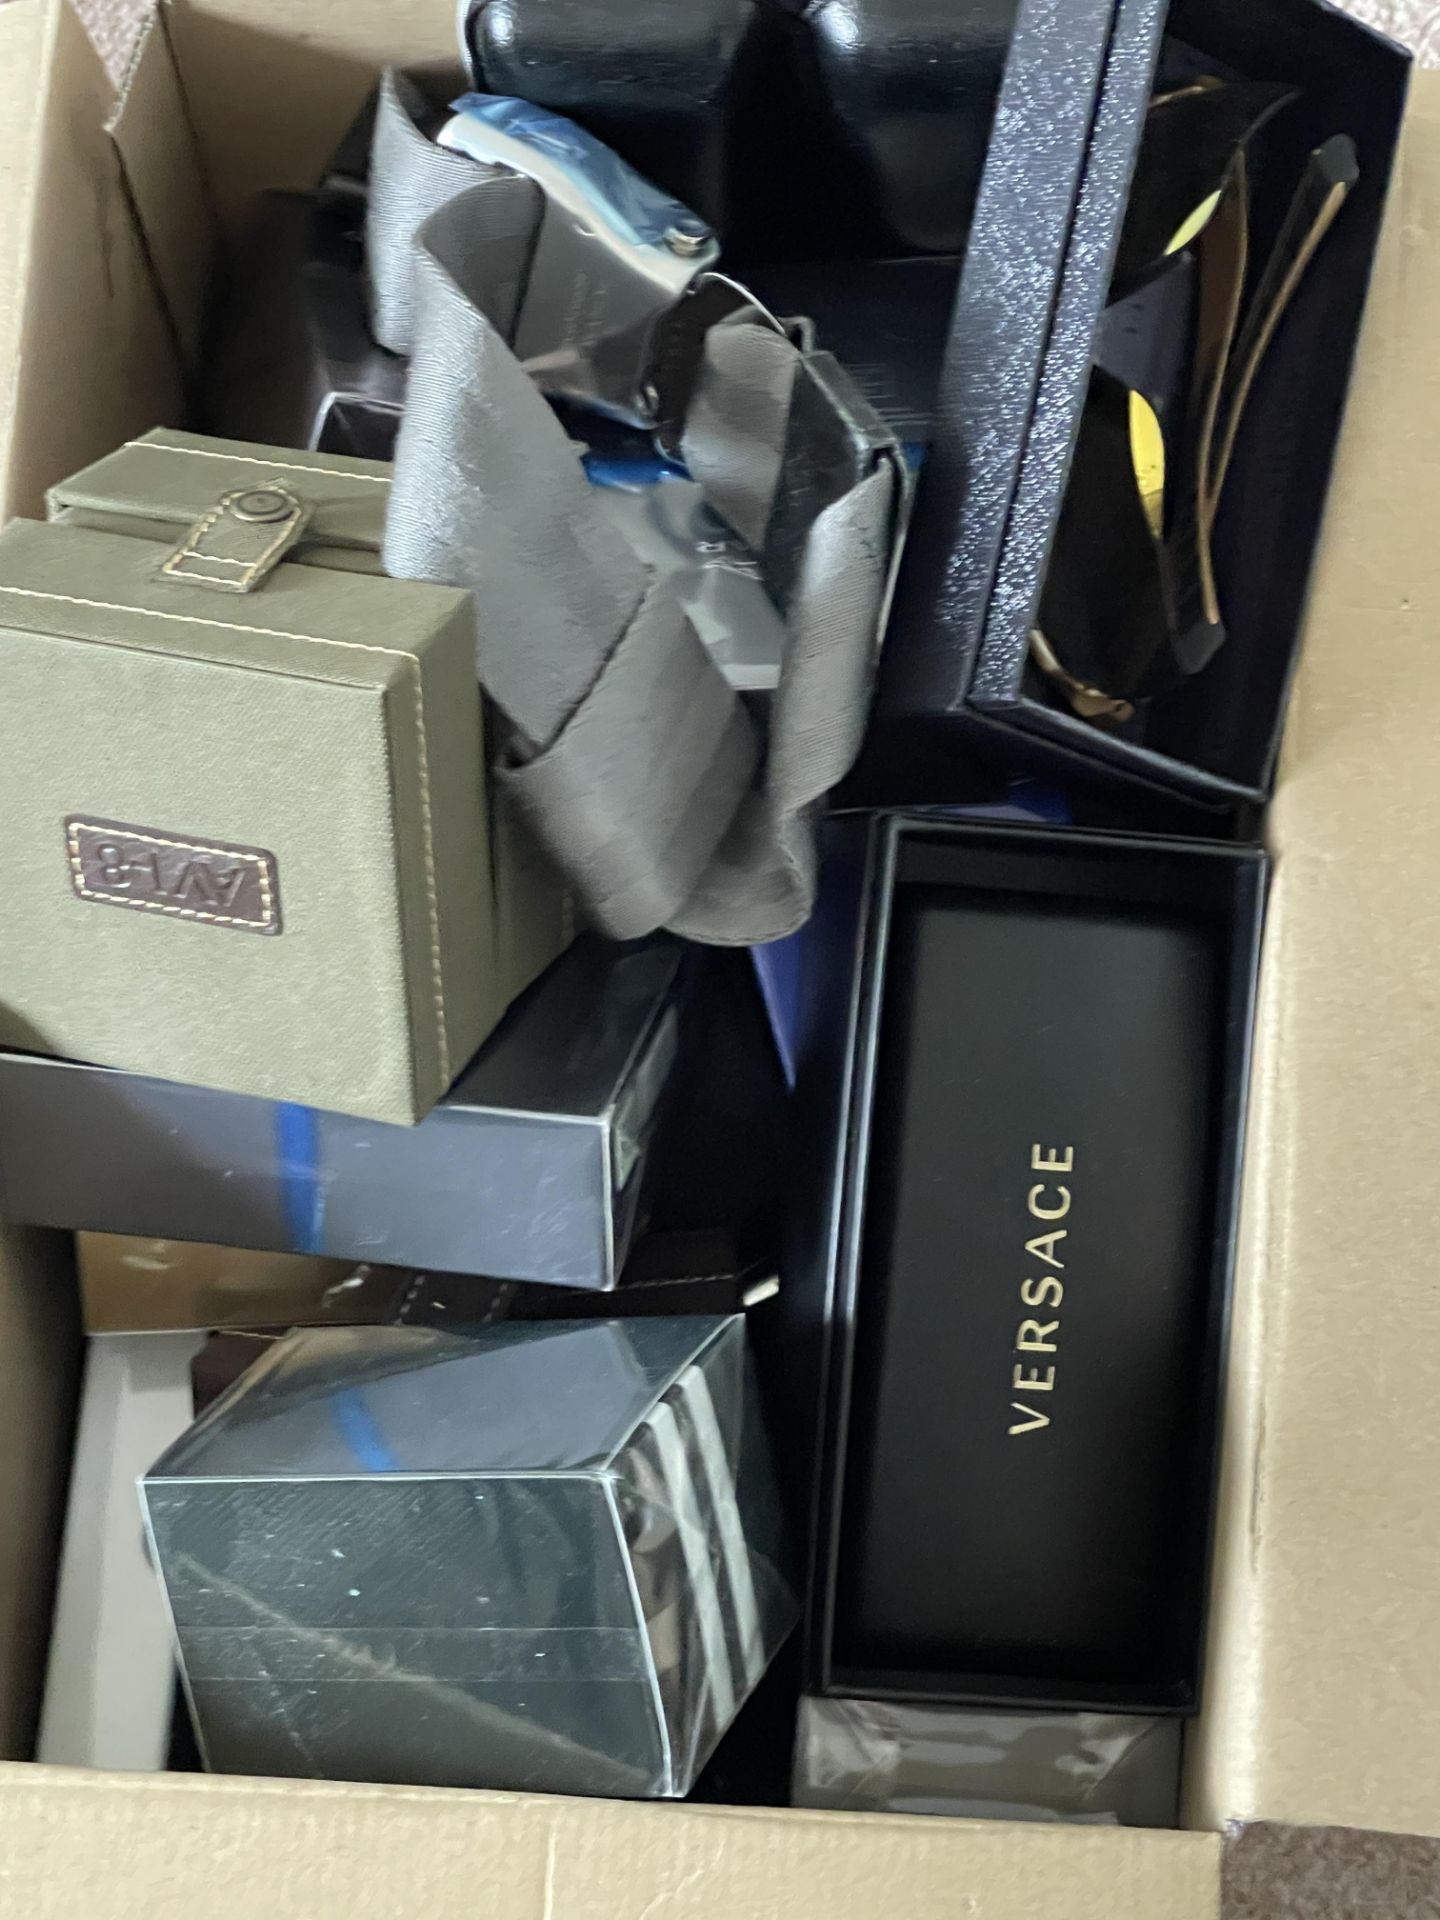 Aftershaves mystery box containing watches sunglasses ect worth